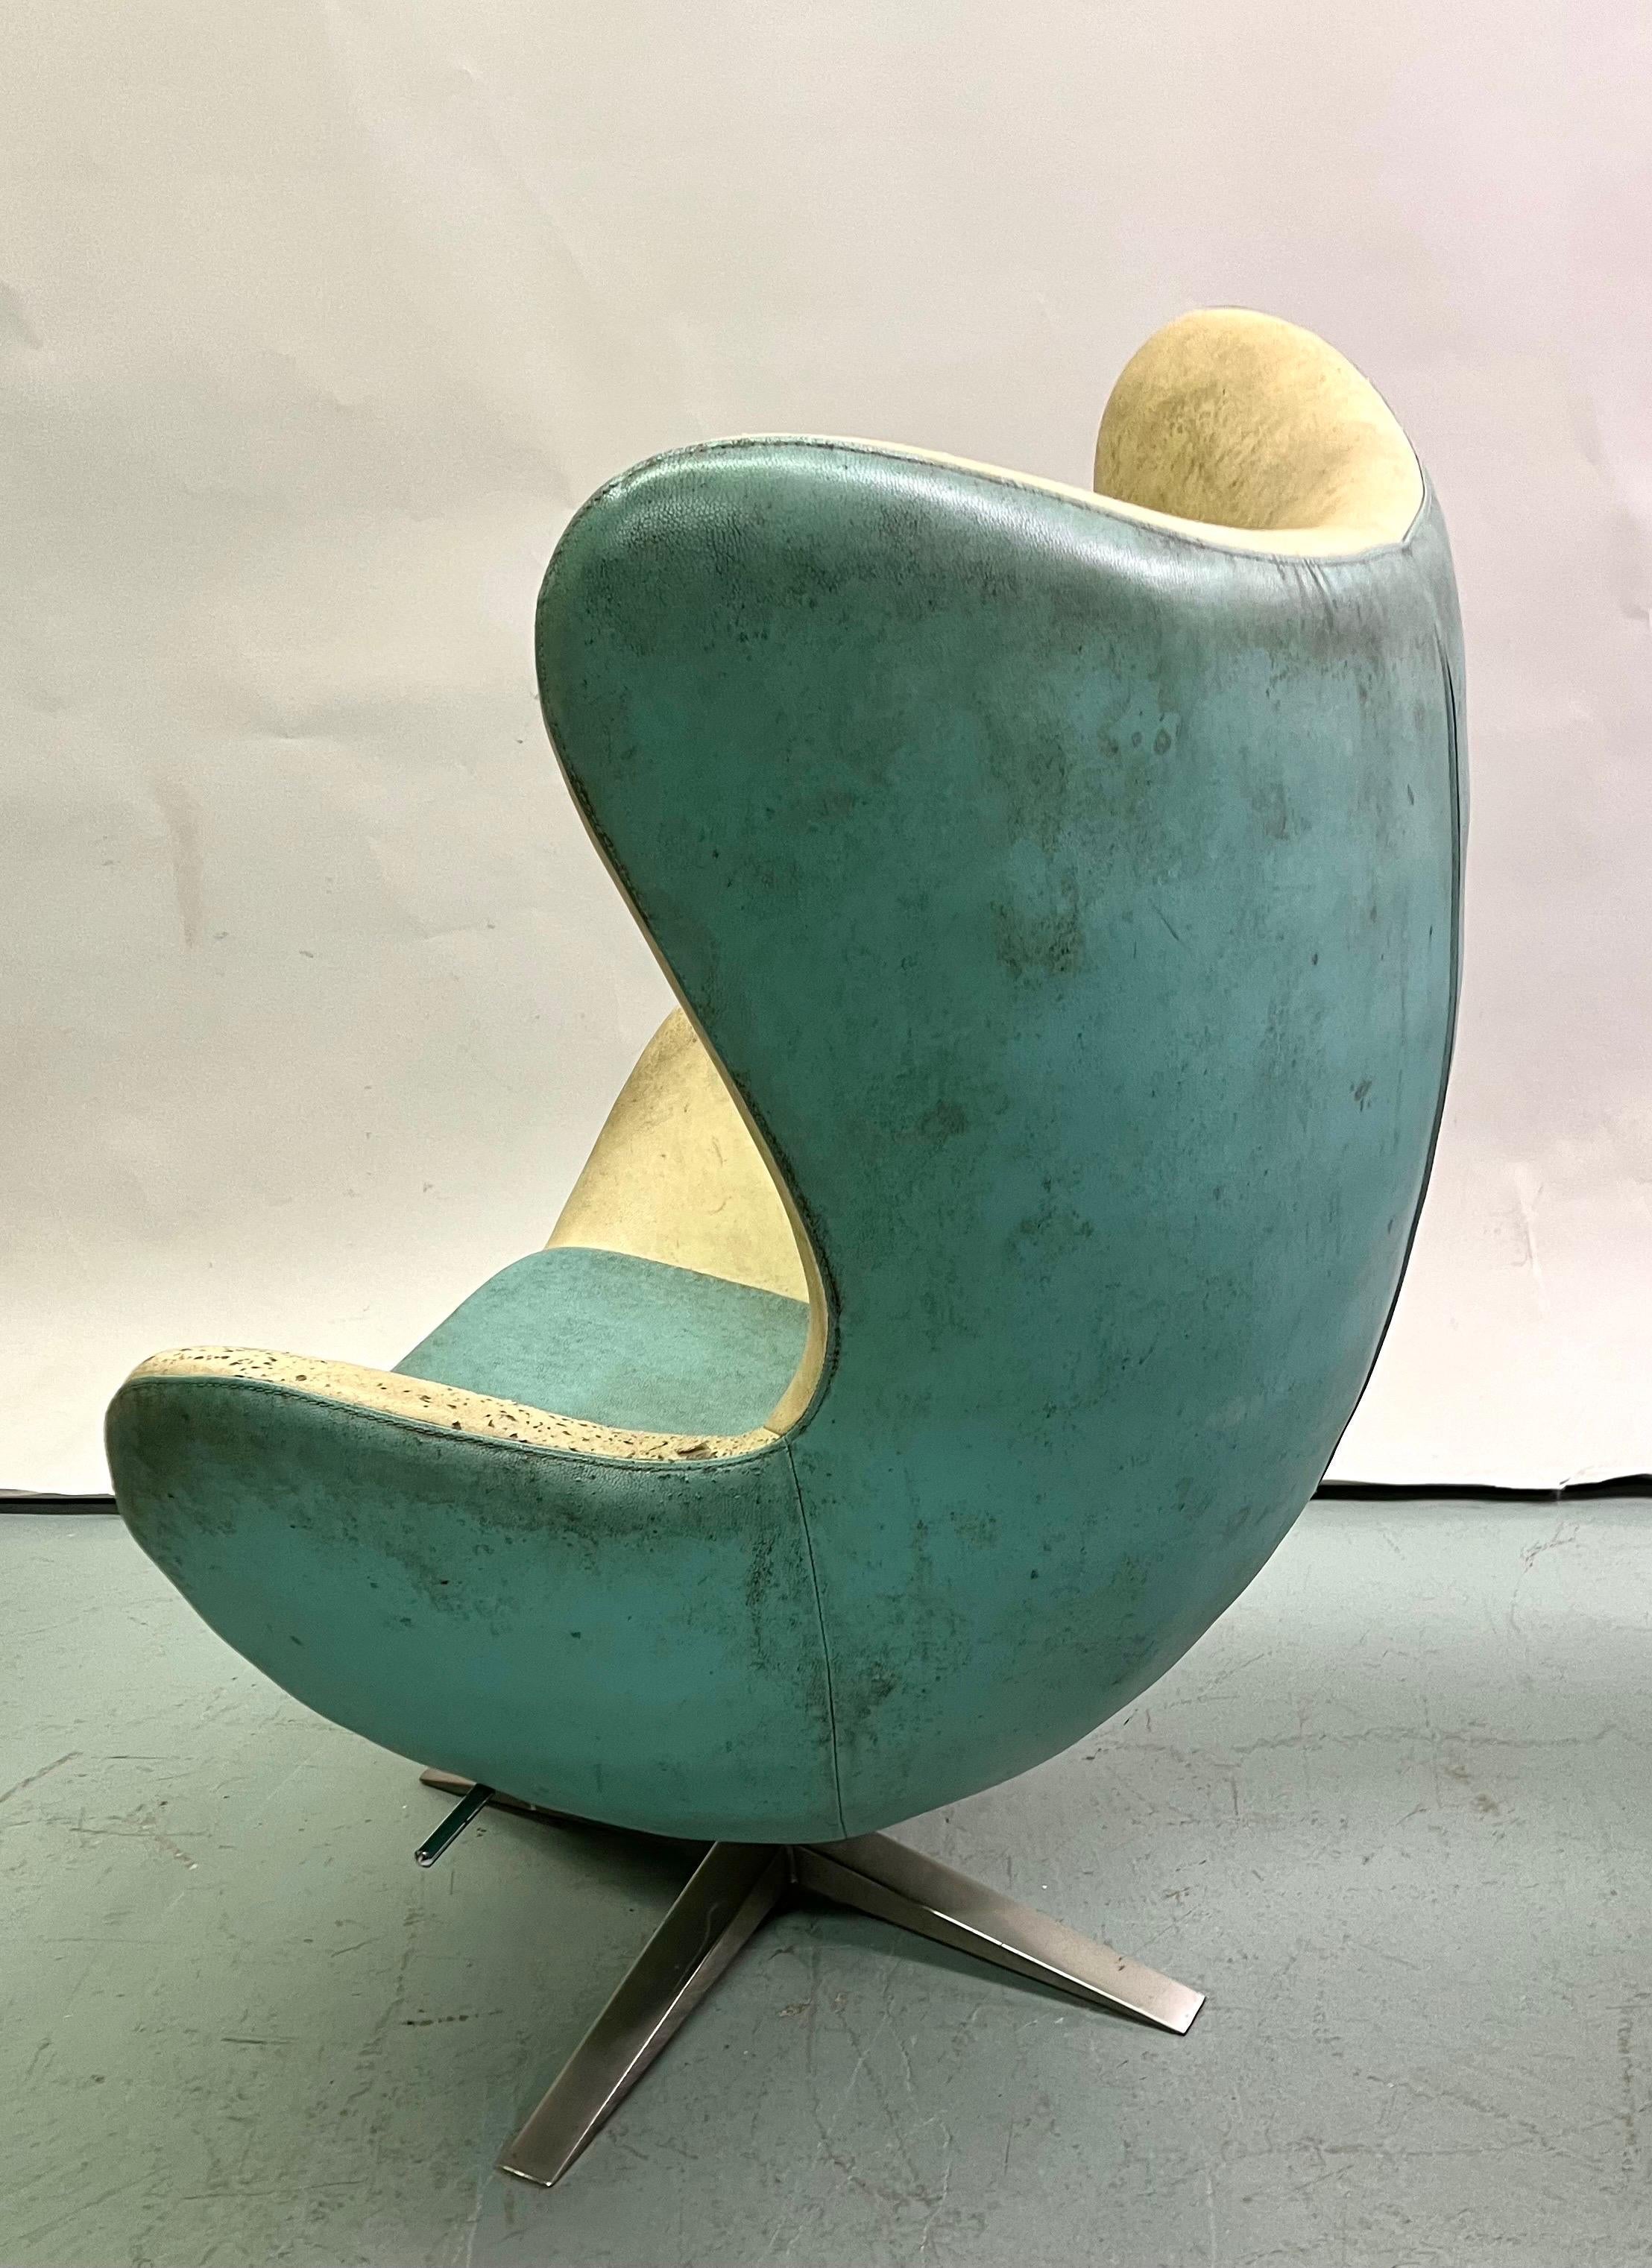 Early Model, Pair of Vintage Leather Danish Egg Chair, Arne Jacobsen, c. 1960 For Sale 7